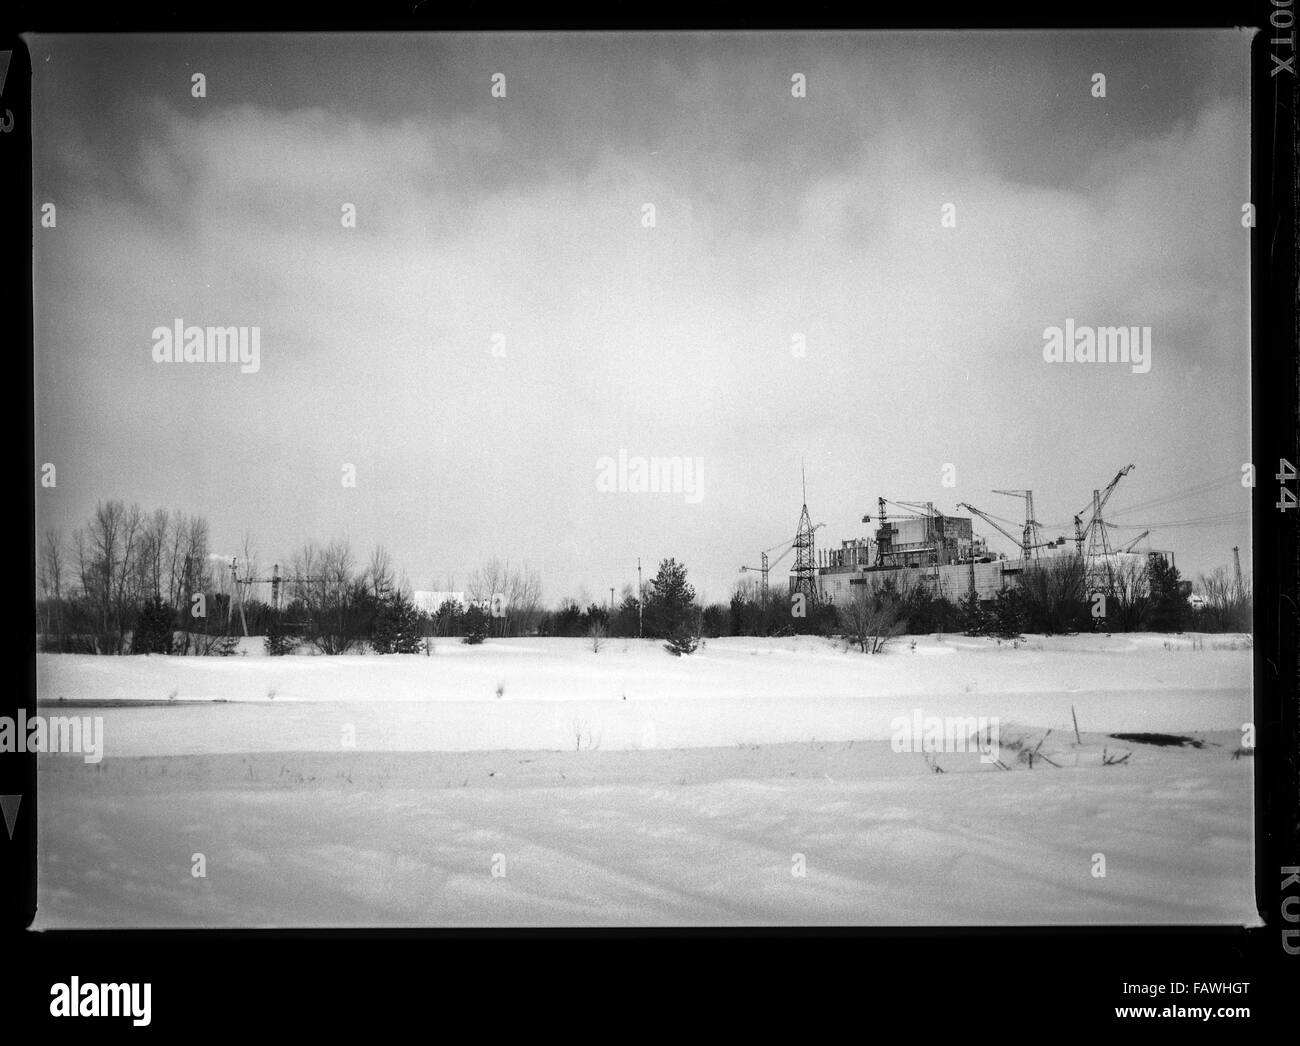 Impressions from Pripyat, a ghost town in the Ukraine, which was established in 1970 in connection with the construction of the Chernobyl nuclear power plant and vacated as a result of the nuclear accident in 1986. At the time of the disaster on 26 April 1986 there lived almost 50,000 people. Most residents were workers in the nuclear power plant. April 26, 2015, the 30th anniversary of Chernobyl nuclear disaster. In a study carried out under the direction of Anatoly Dyatlov simulation of a complete power failure occurred due to serious breaches of the applicable safety requirements and the ma Stock Photo